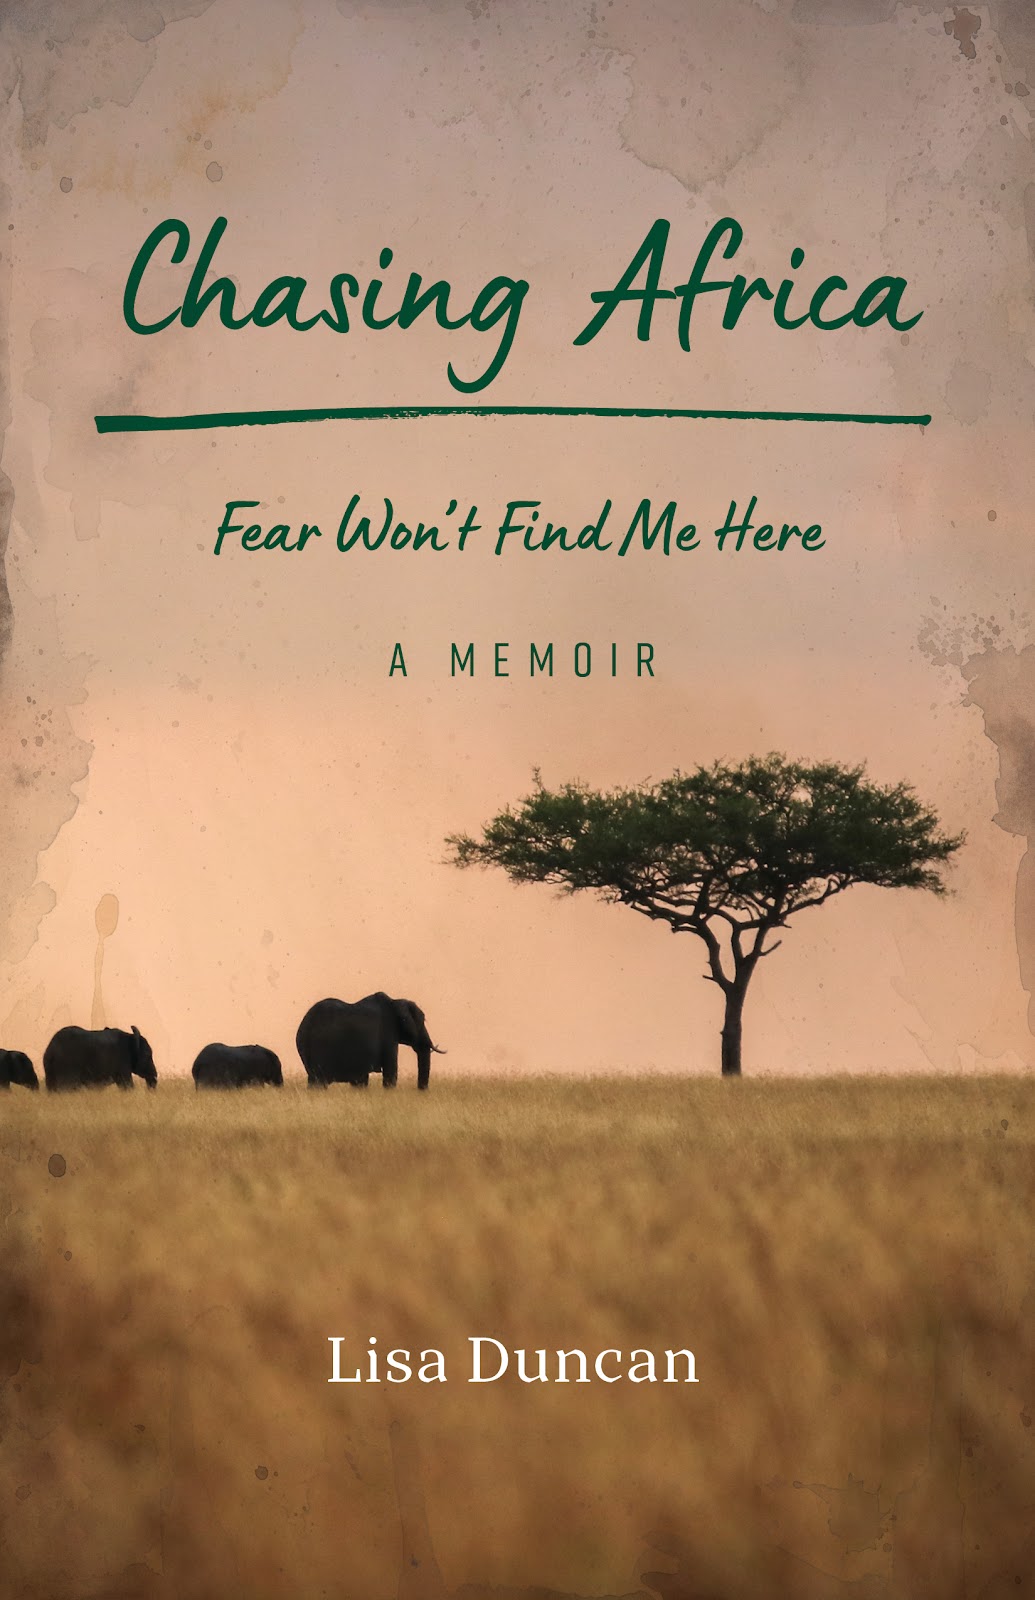 Chasing Africa: Fear Won't Find Me Here